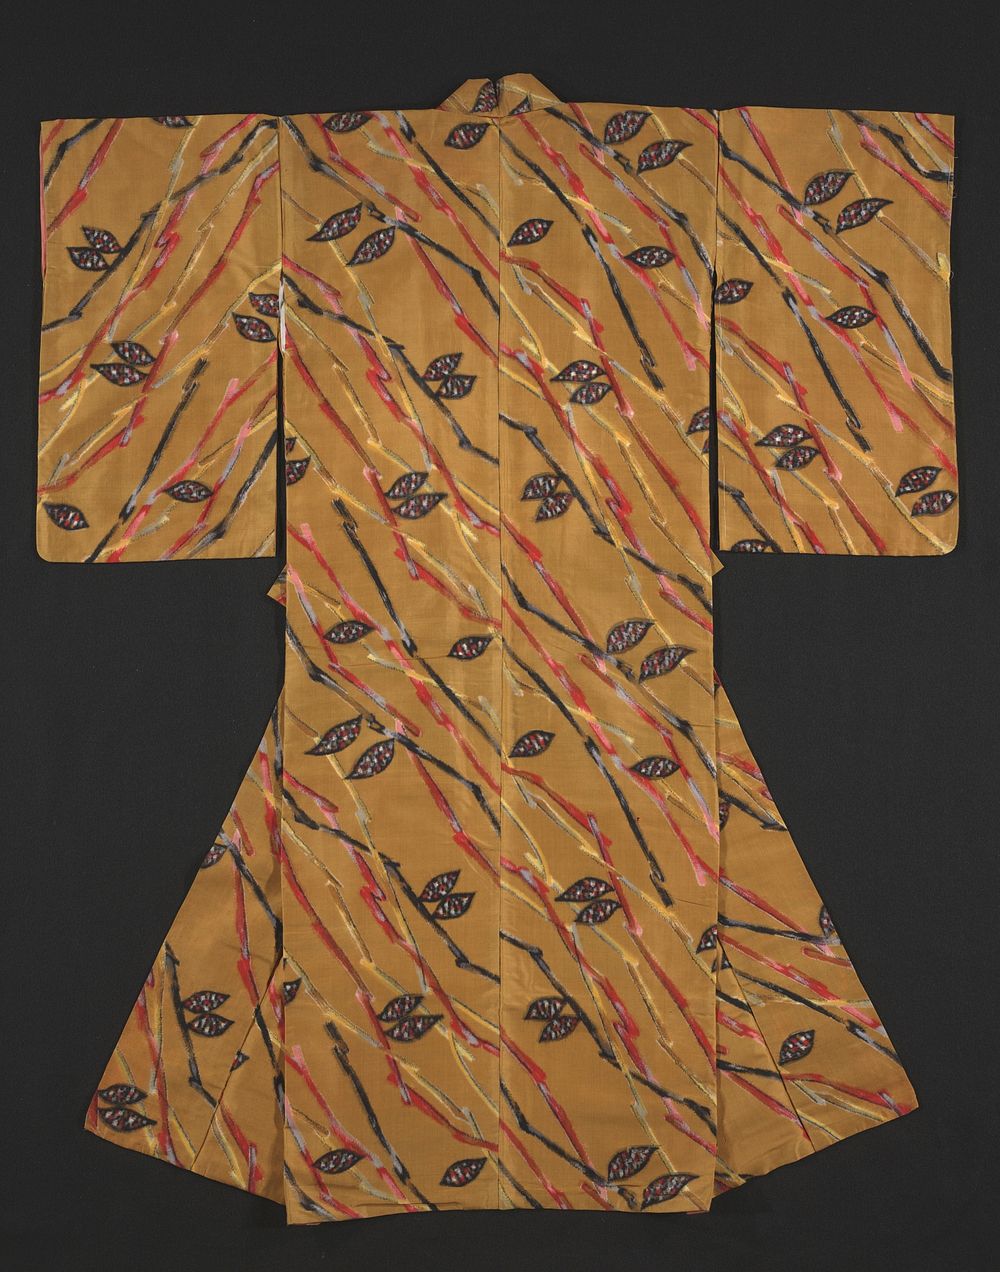 orange-brown background with multi-colored branch and leaf motif. Original from the Minneapolis Institute of Art.